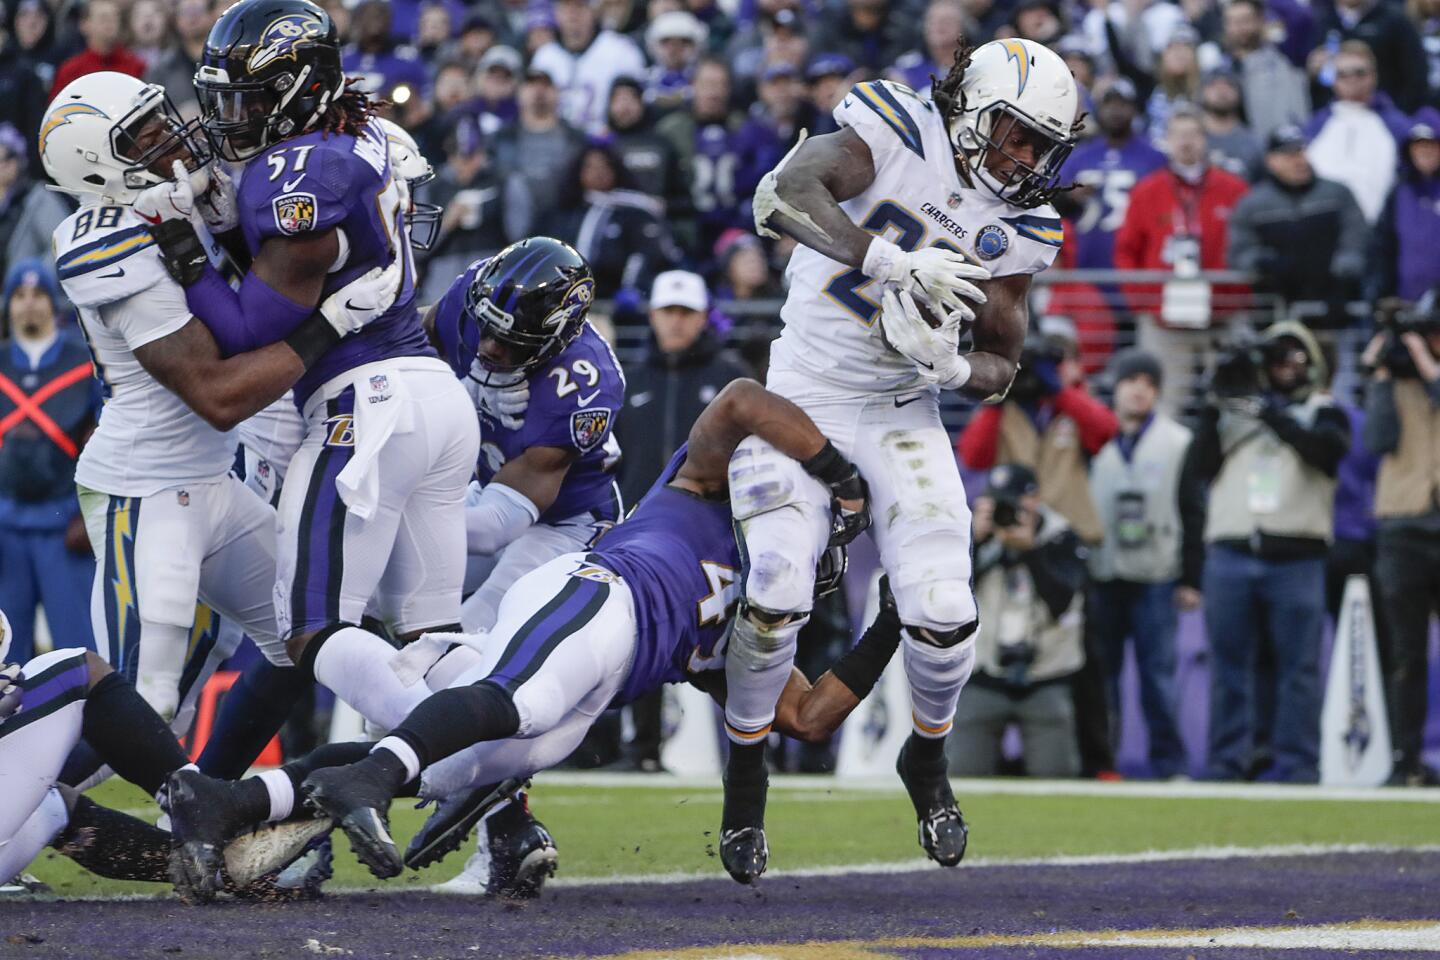 Chargers running back Melvin Gordon scores a touchdown early in the fourth quarter, on a fourth-down play near the goal line.